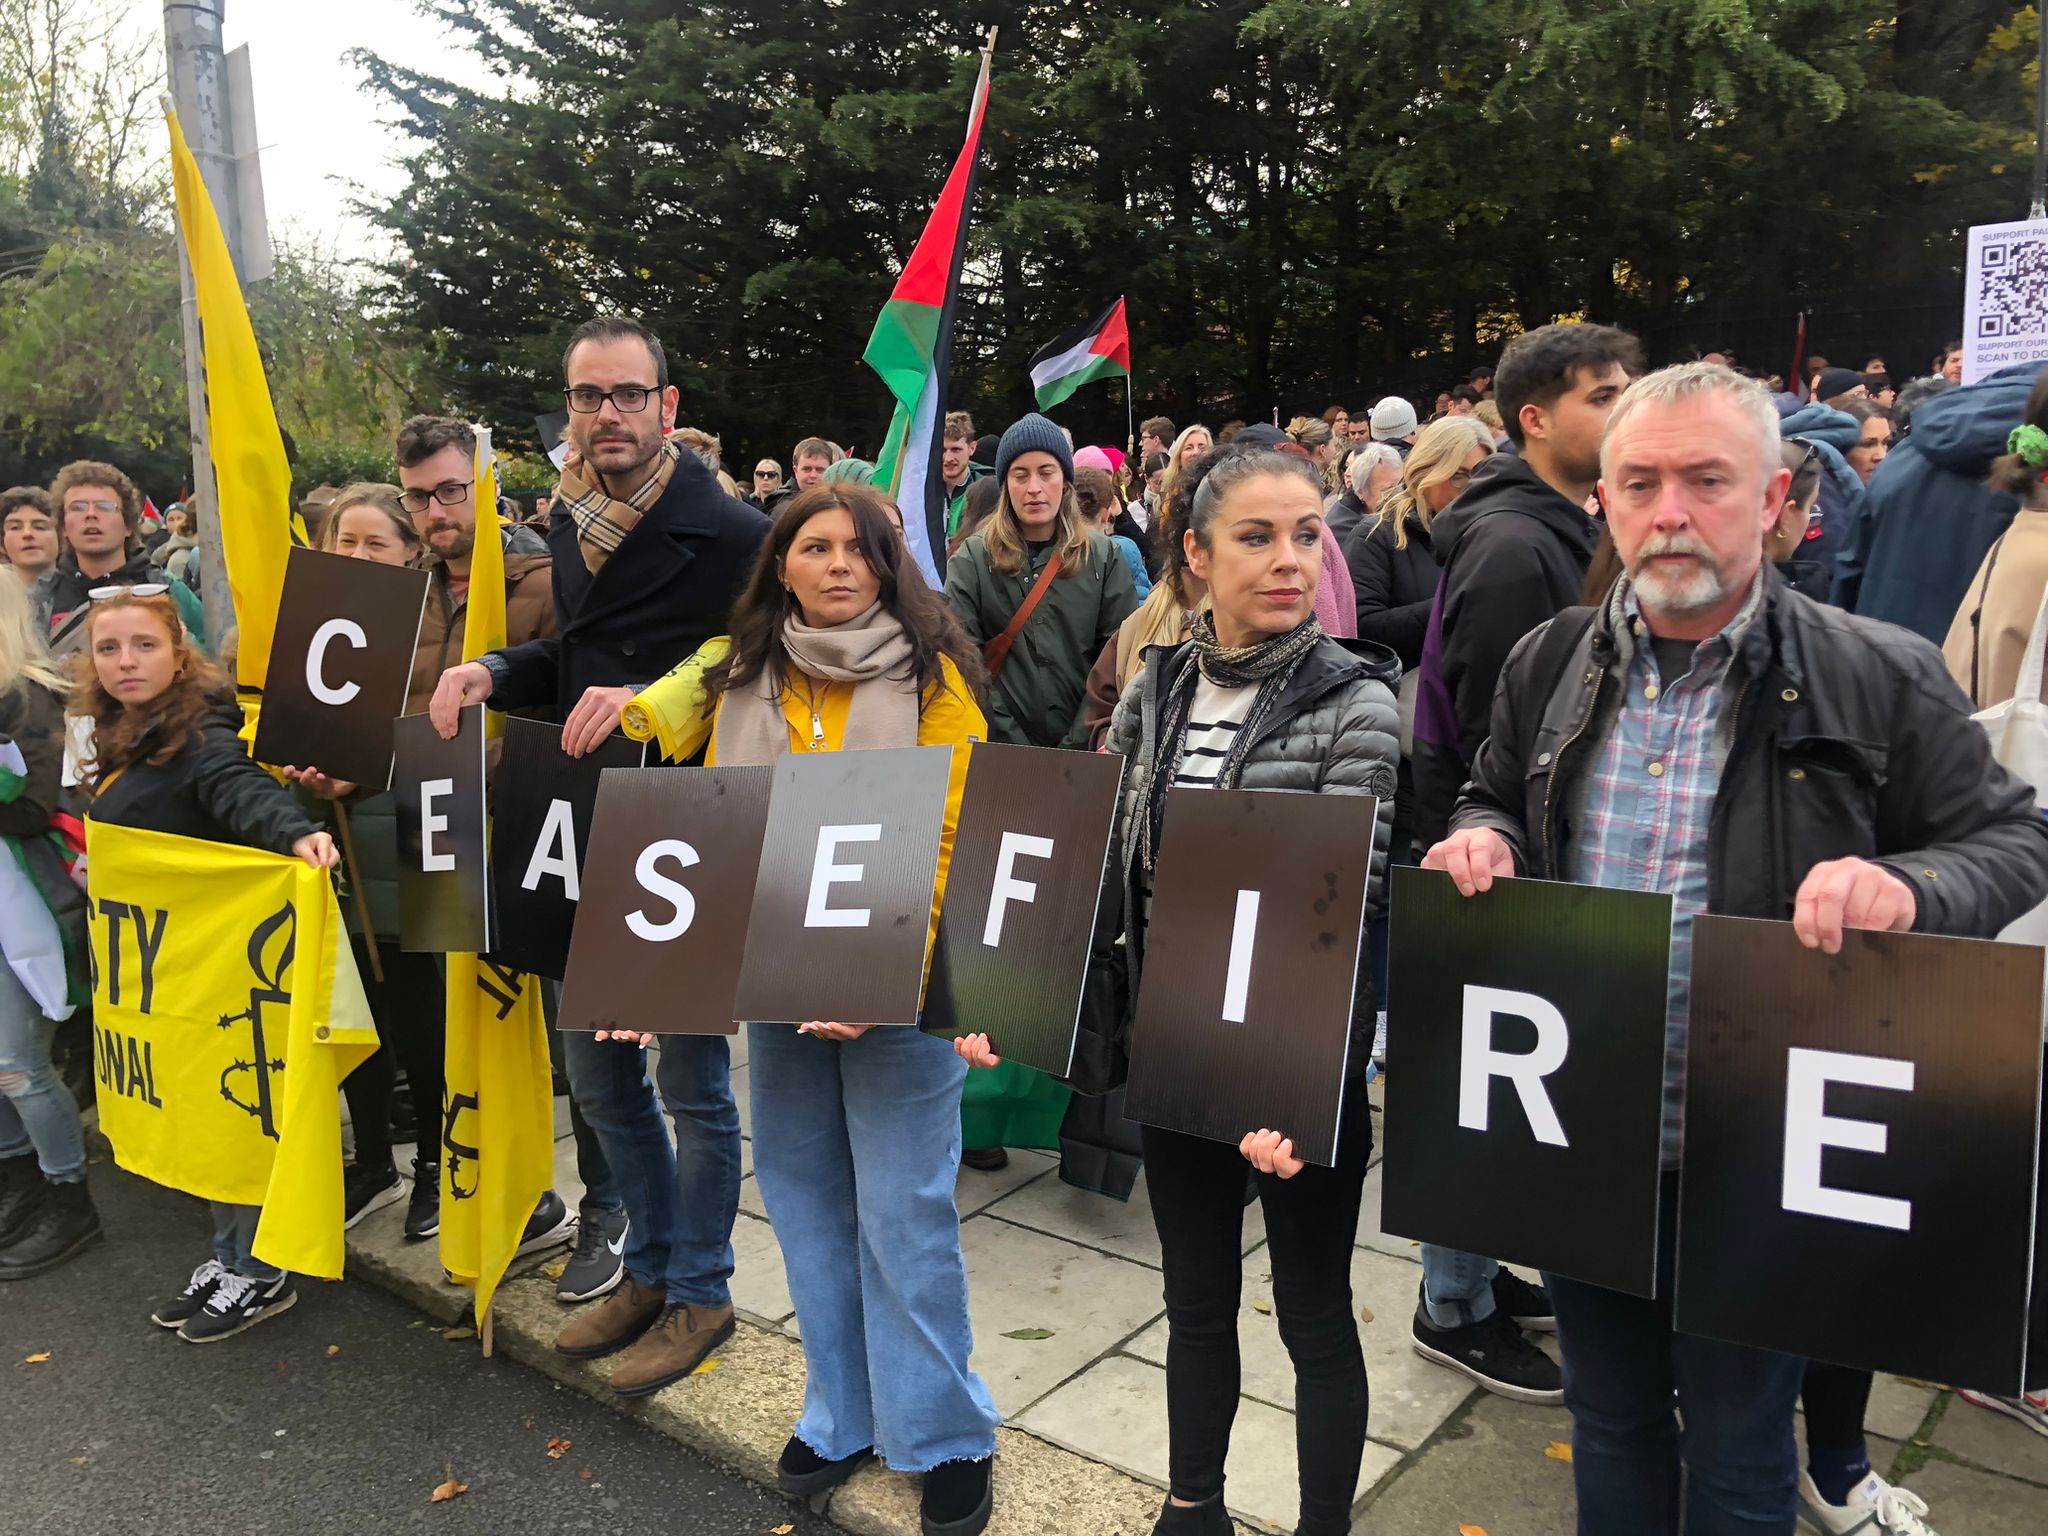 European governments donors’ discriminatory funding restrictions to Palestinian civil society risk deepening human rights crisis